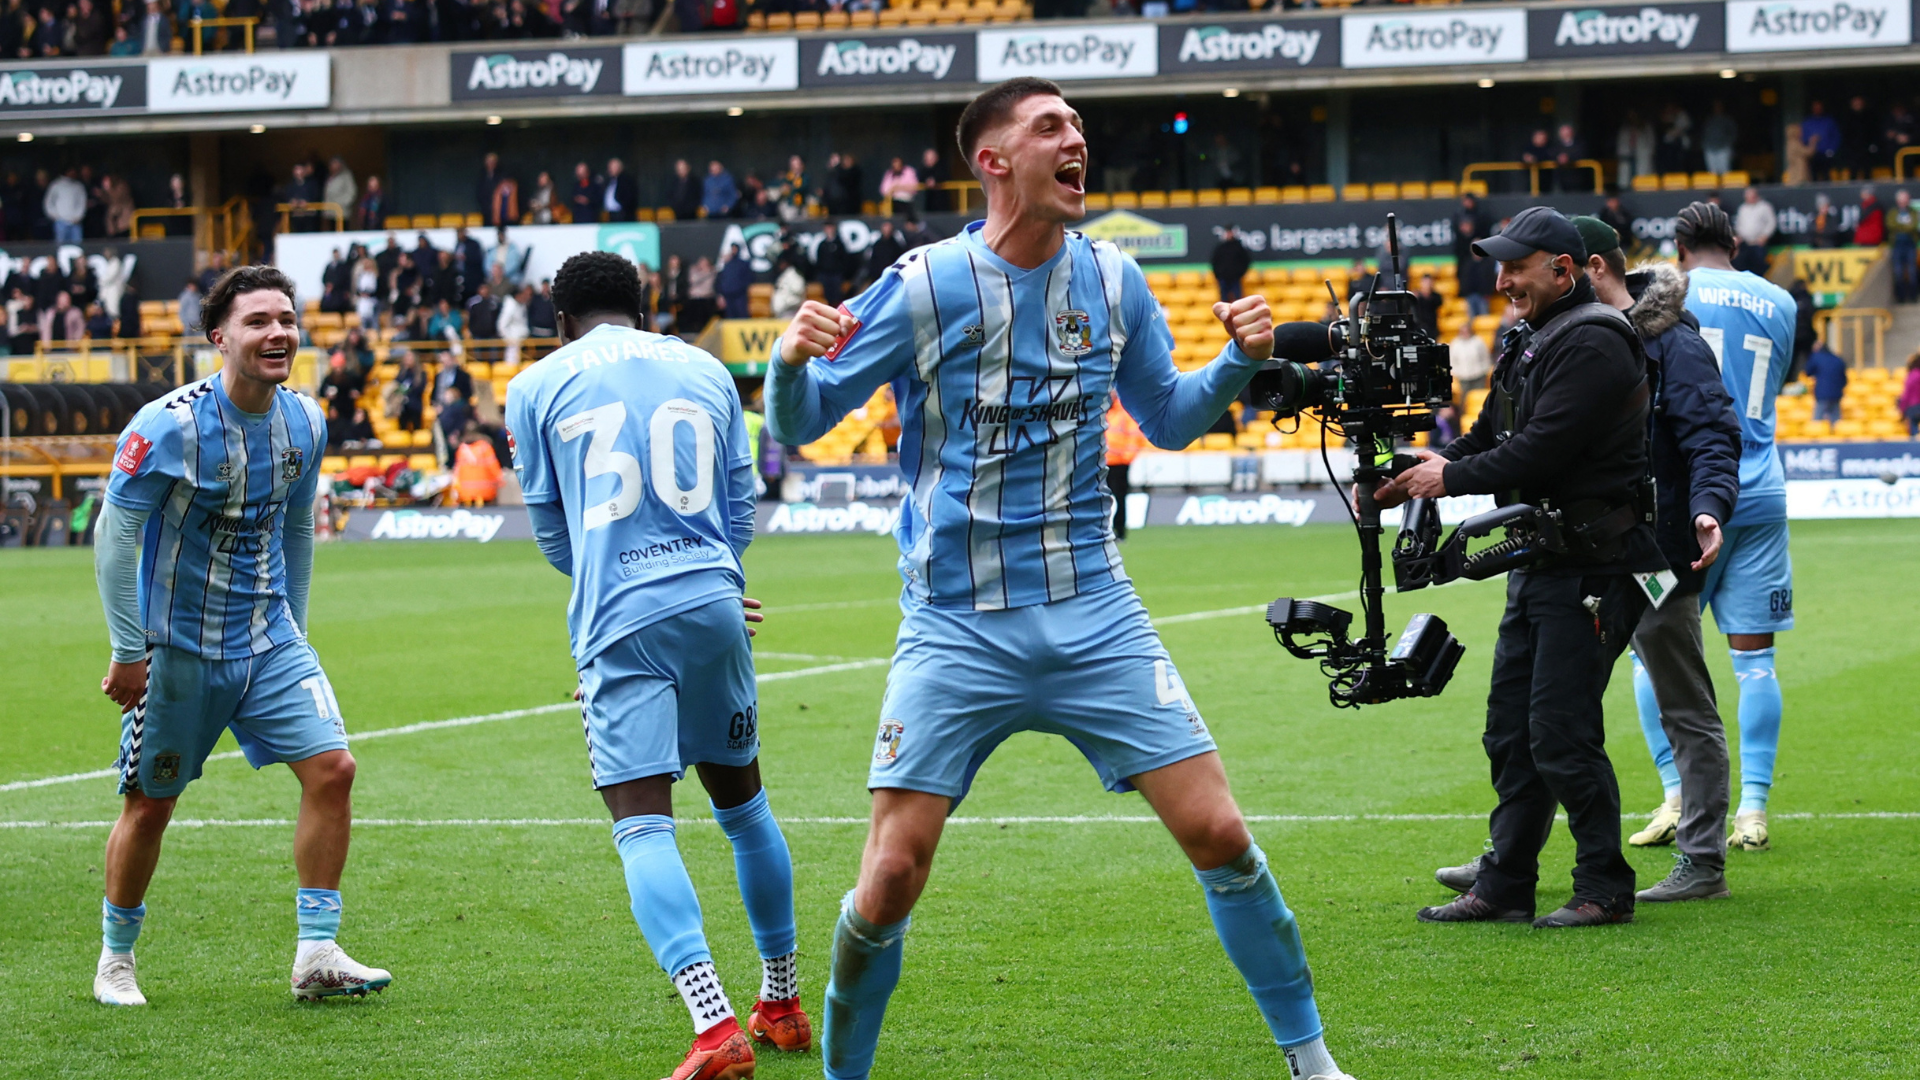 Coventry City celebrate after Wolves win